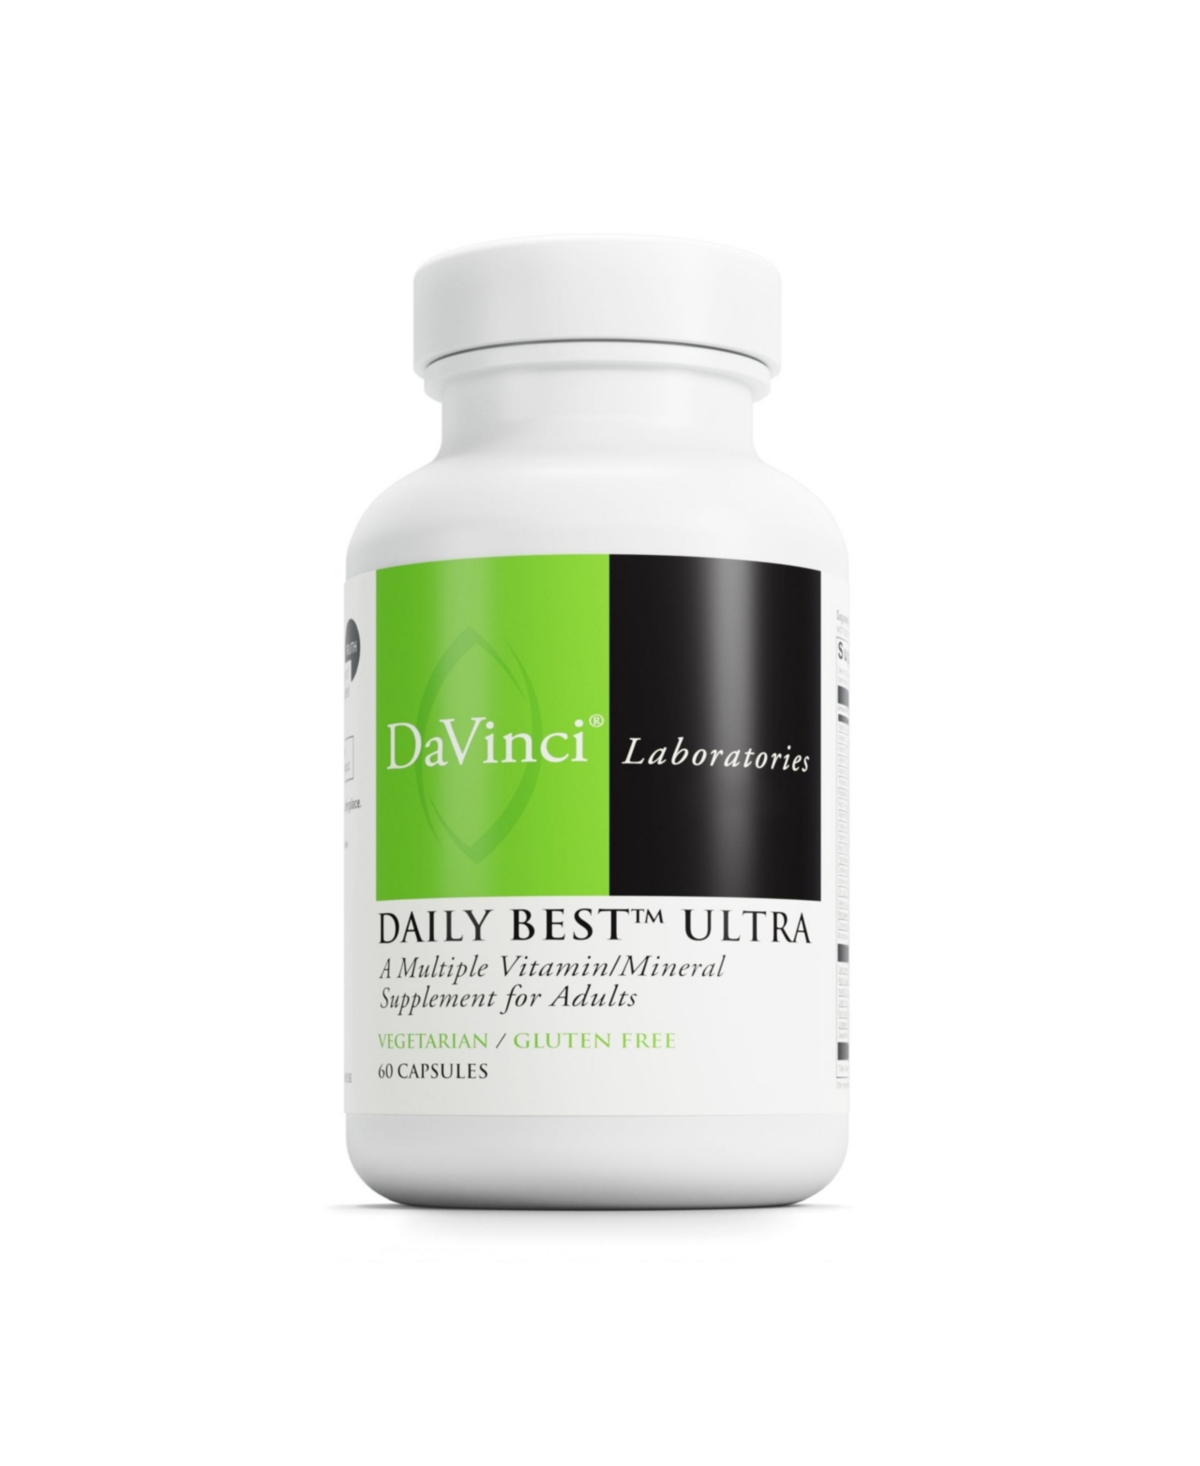 DaVinci Labs Daily Best Ultra - Dietary Supplement to Support Cardiovascular Health, Fat Metabolism and Bone Health - With B Vita